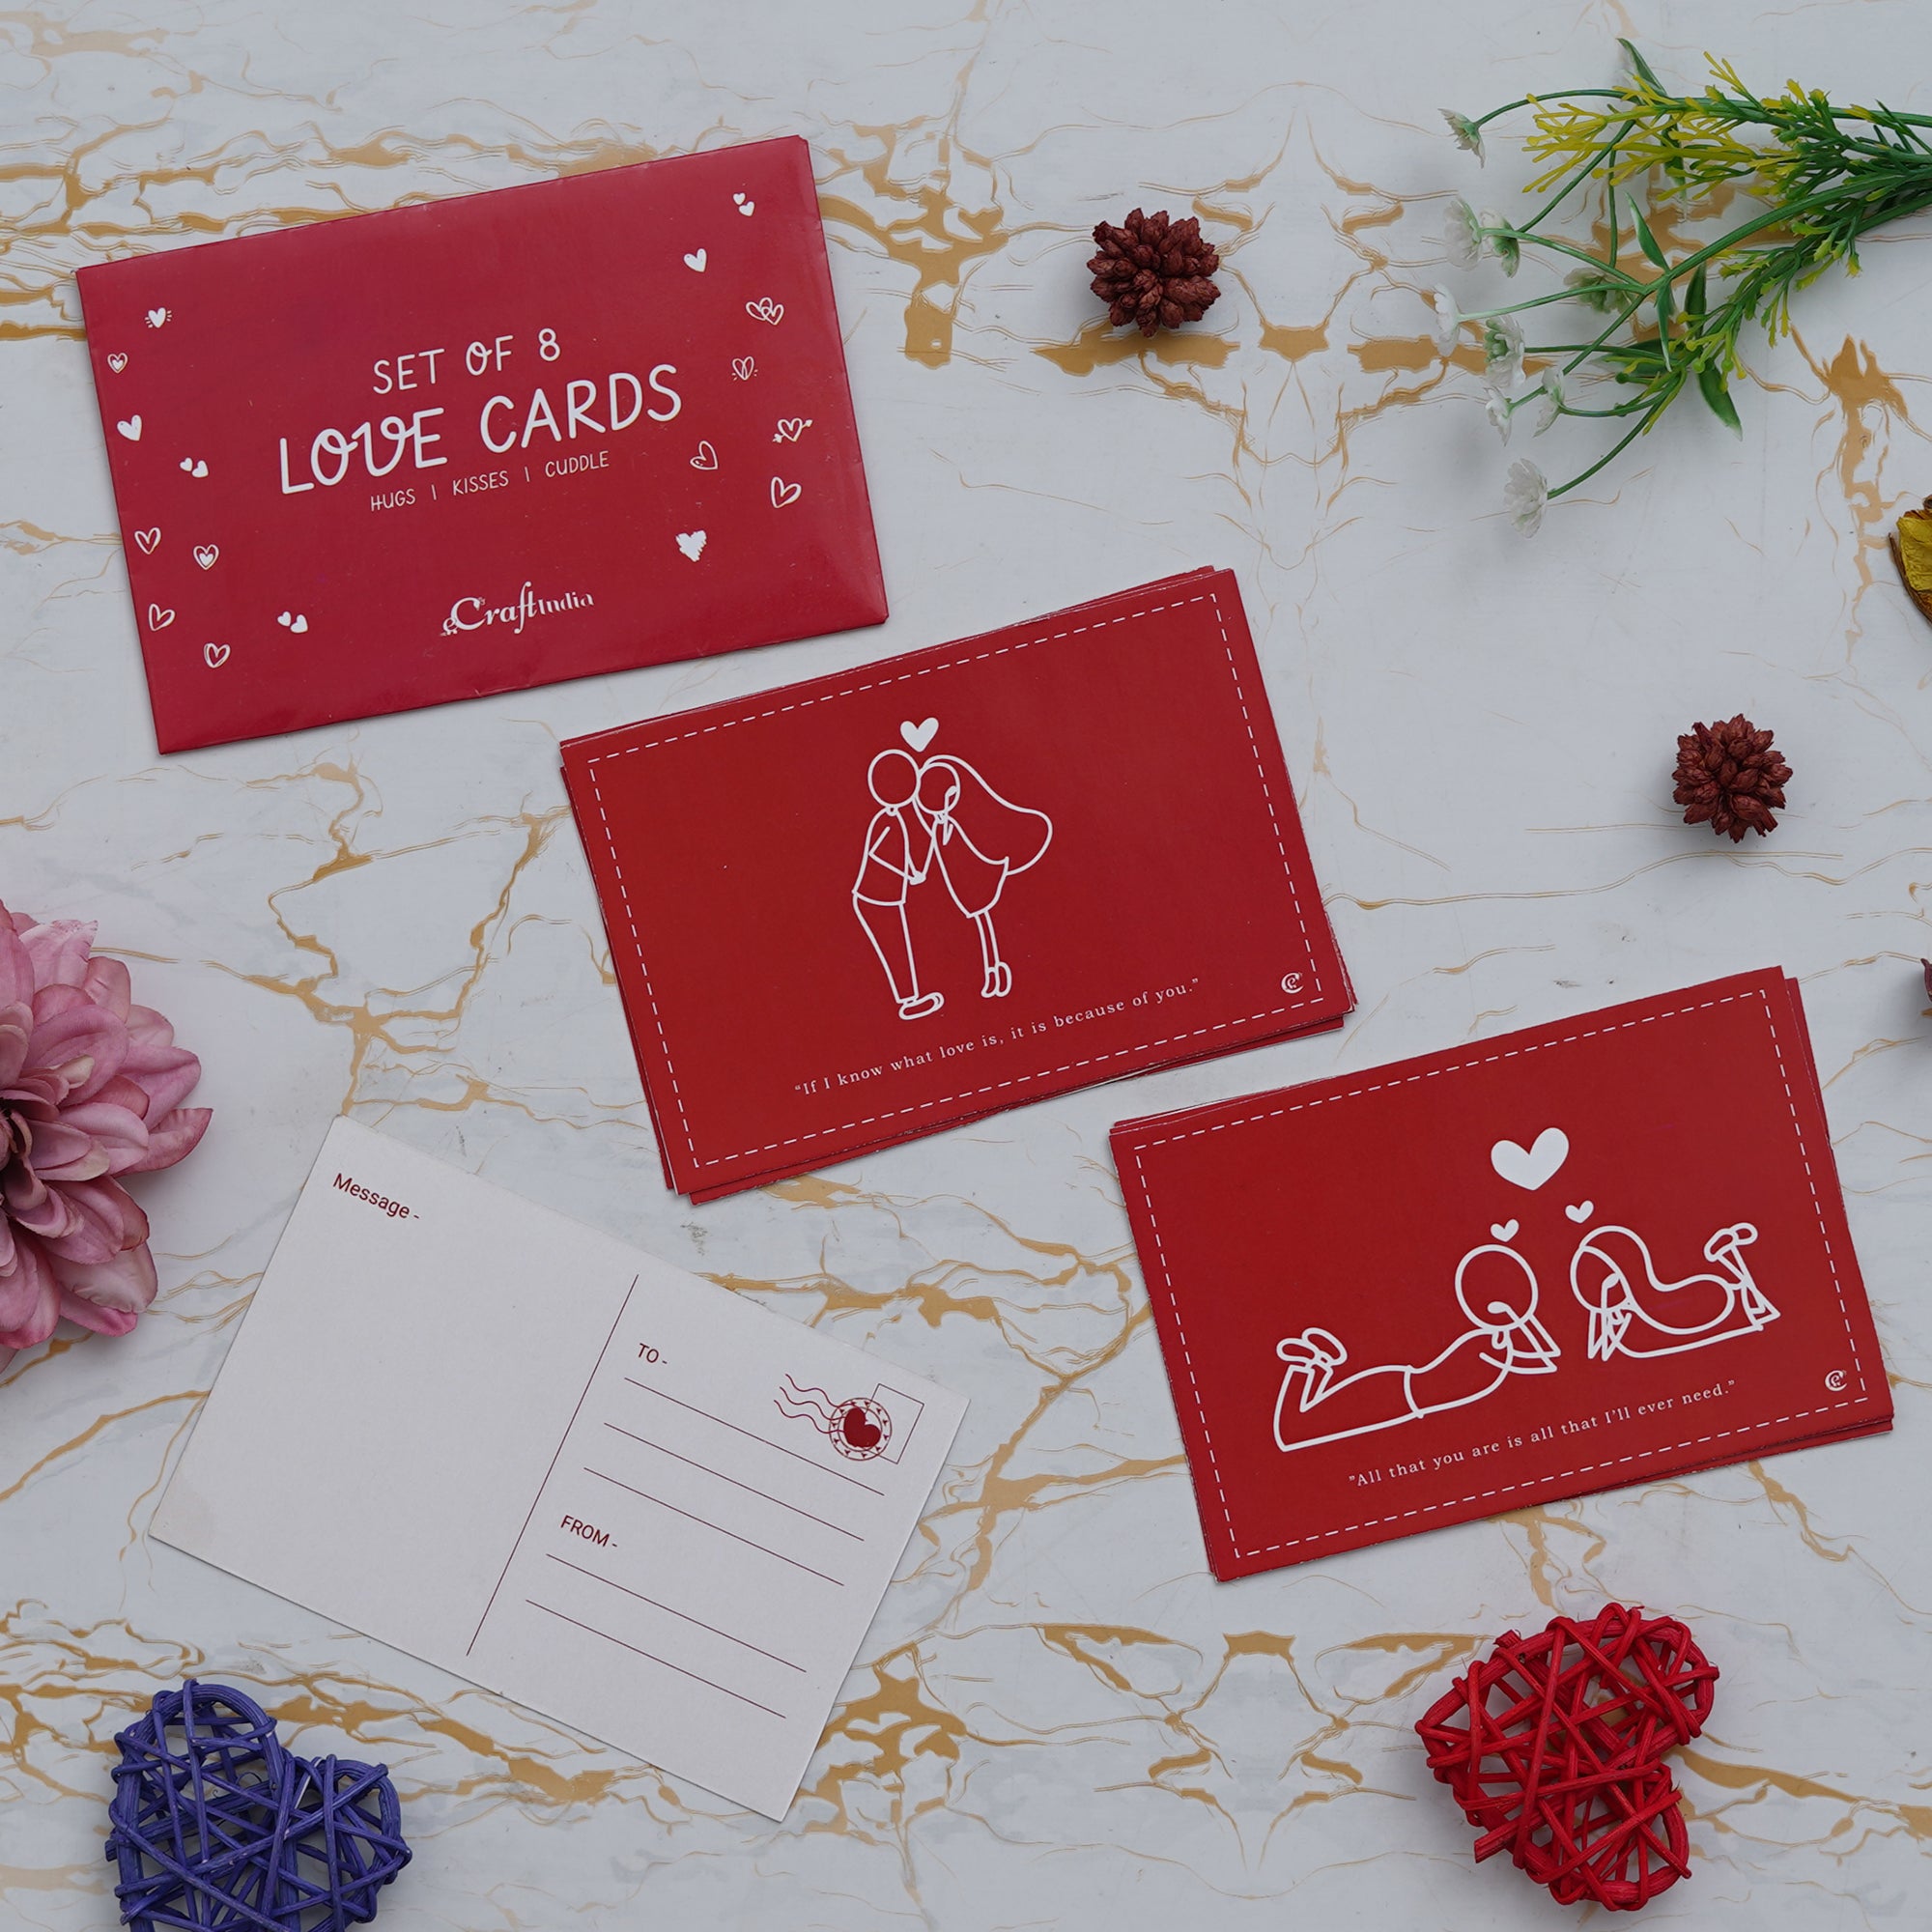 Valentine Combo of Pack of 8 Love Gift Cards, Golden Rose Gift Set, "20 Reasons Why I Love You" Printed on Little Red Hearts Decorative Wooden Gift Set Box 1